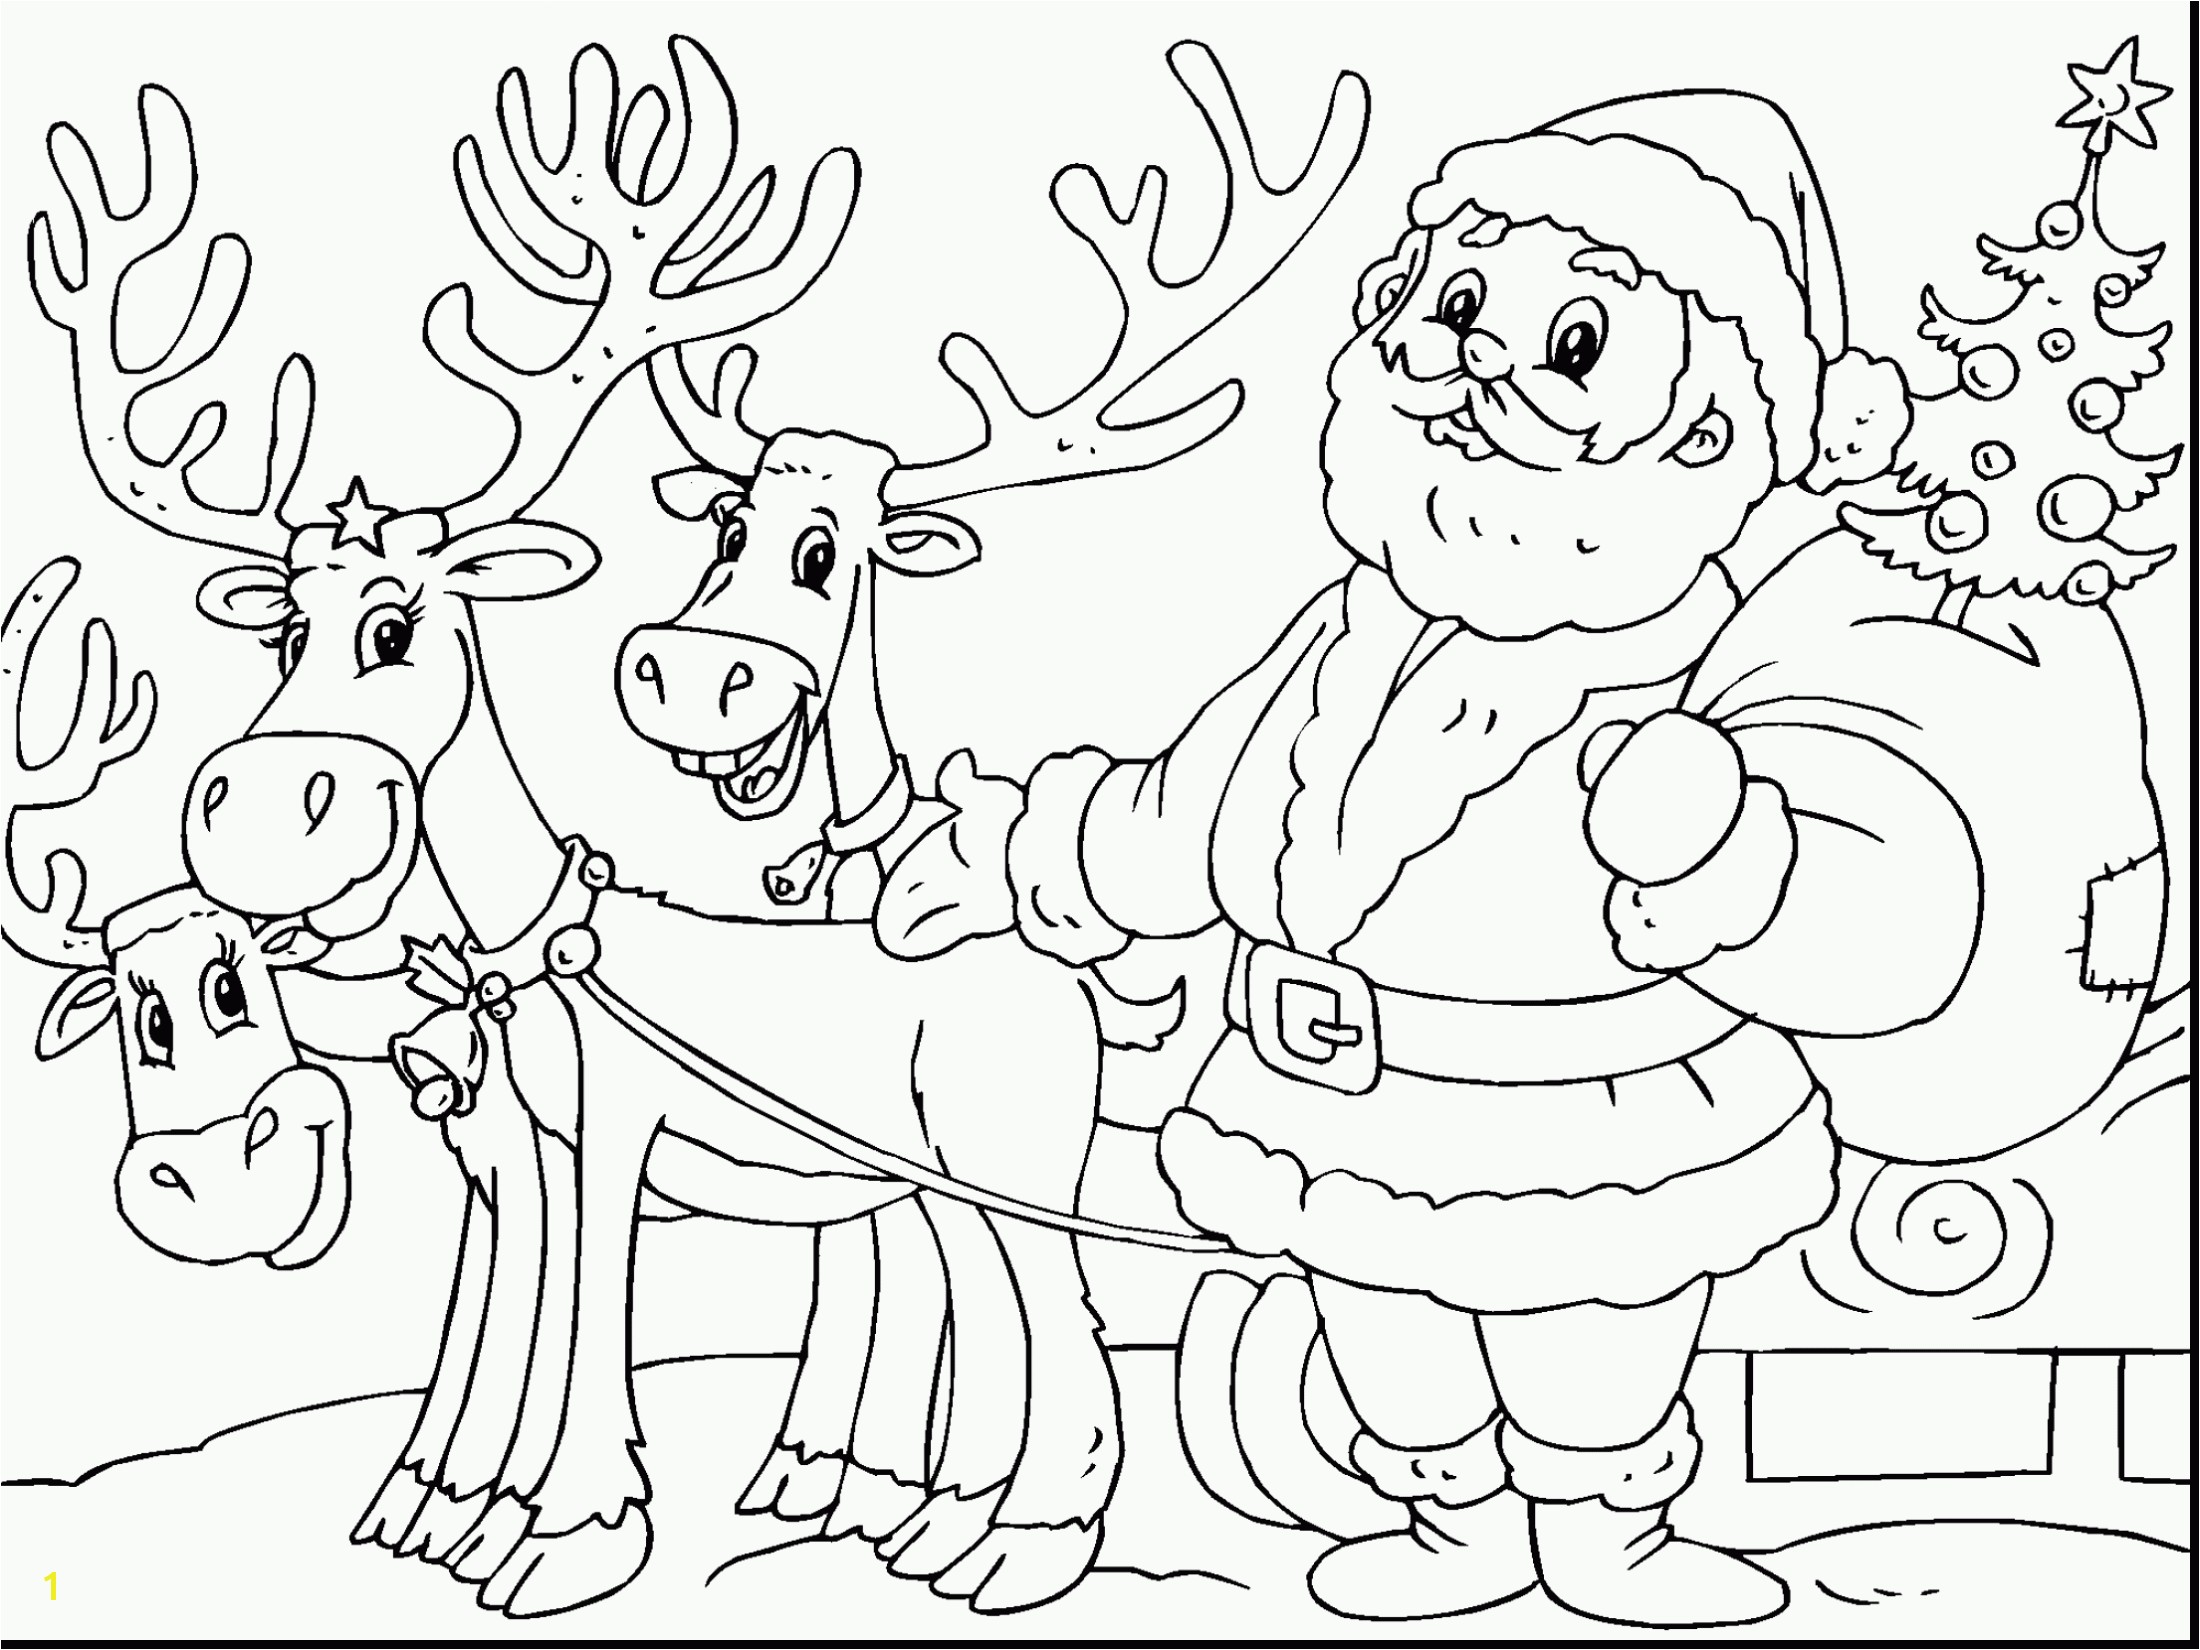 santa and reindeer coloring pages coloringpages santa claus and his reindeeroring pages santas pulling sleigh free